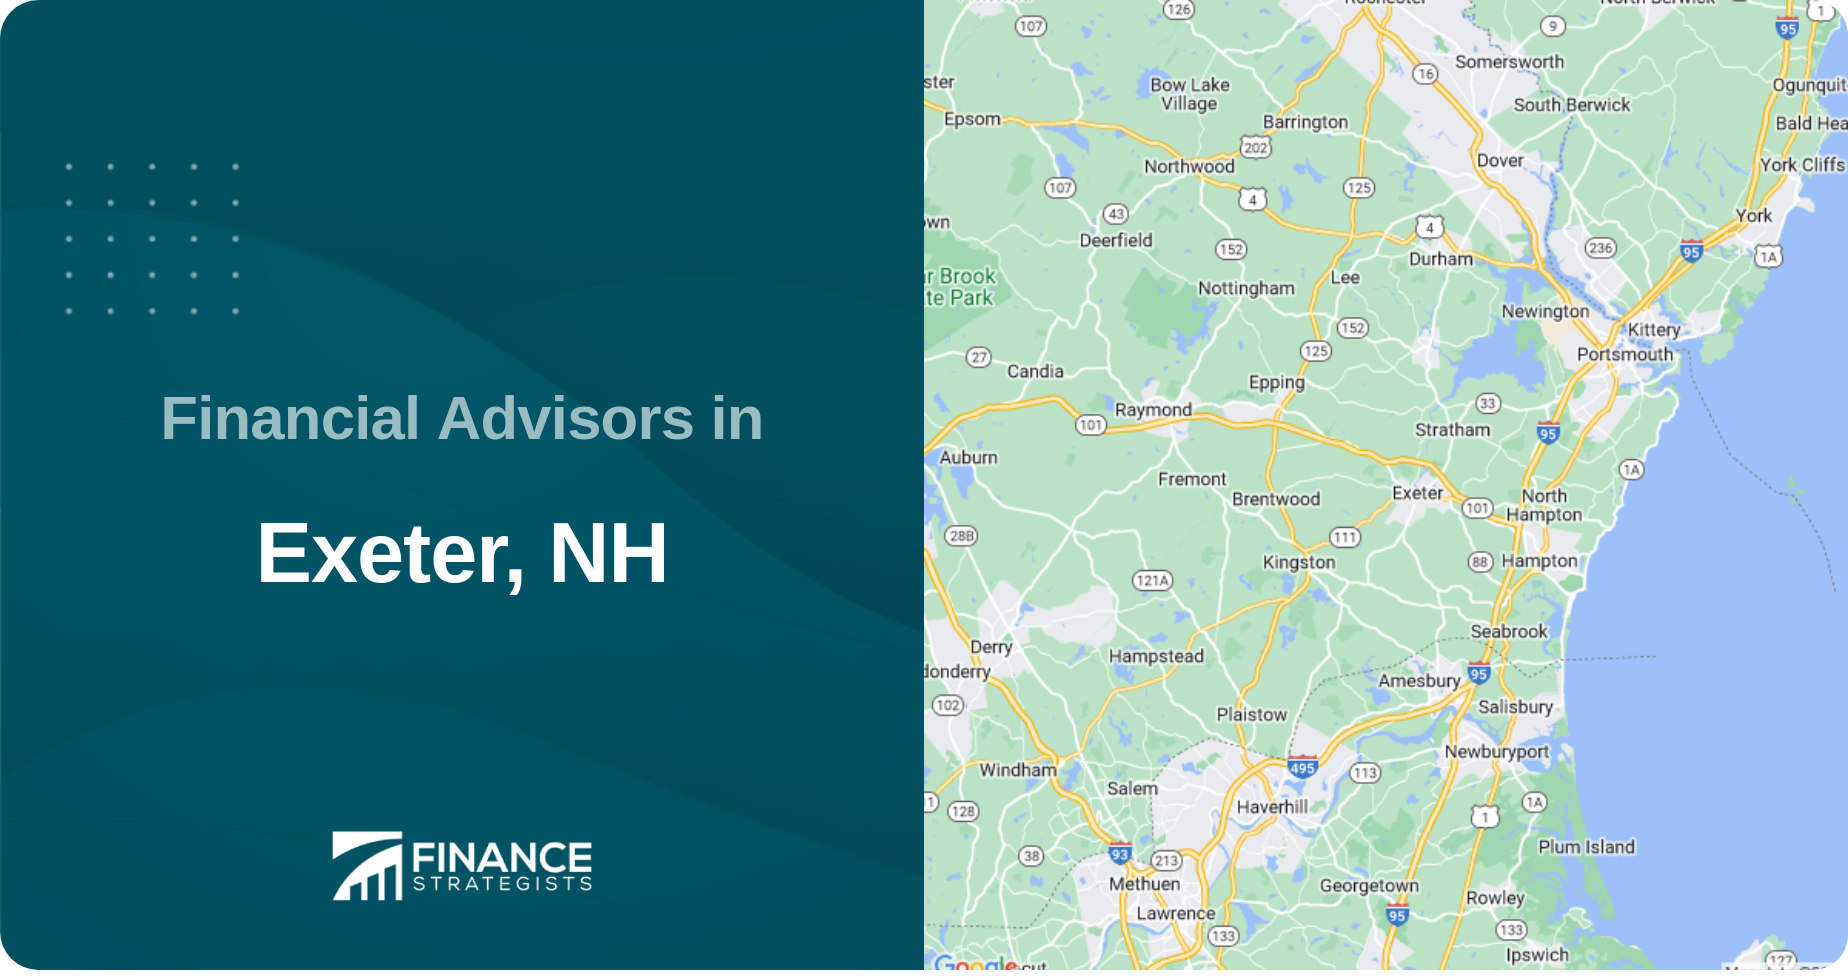 Financial Advisors in Exeter, NH